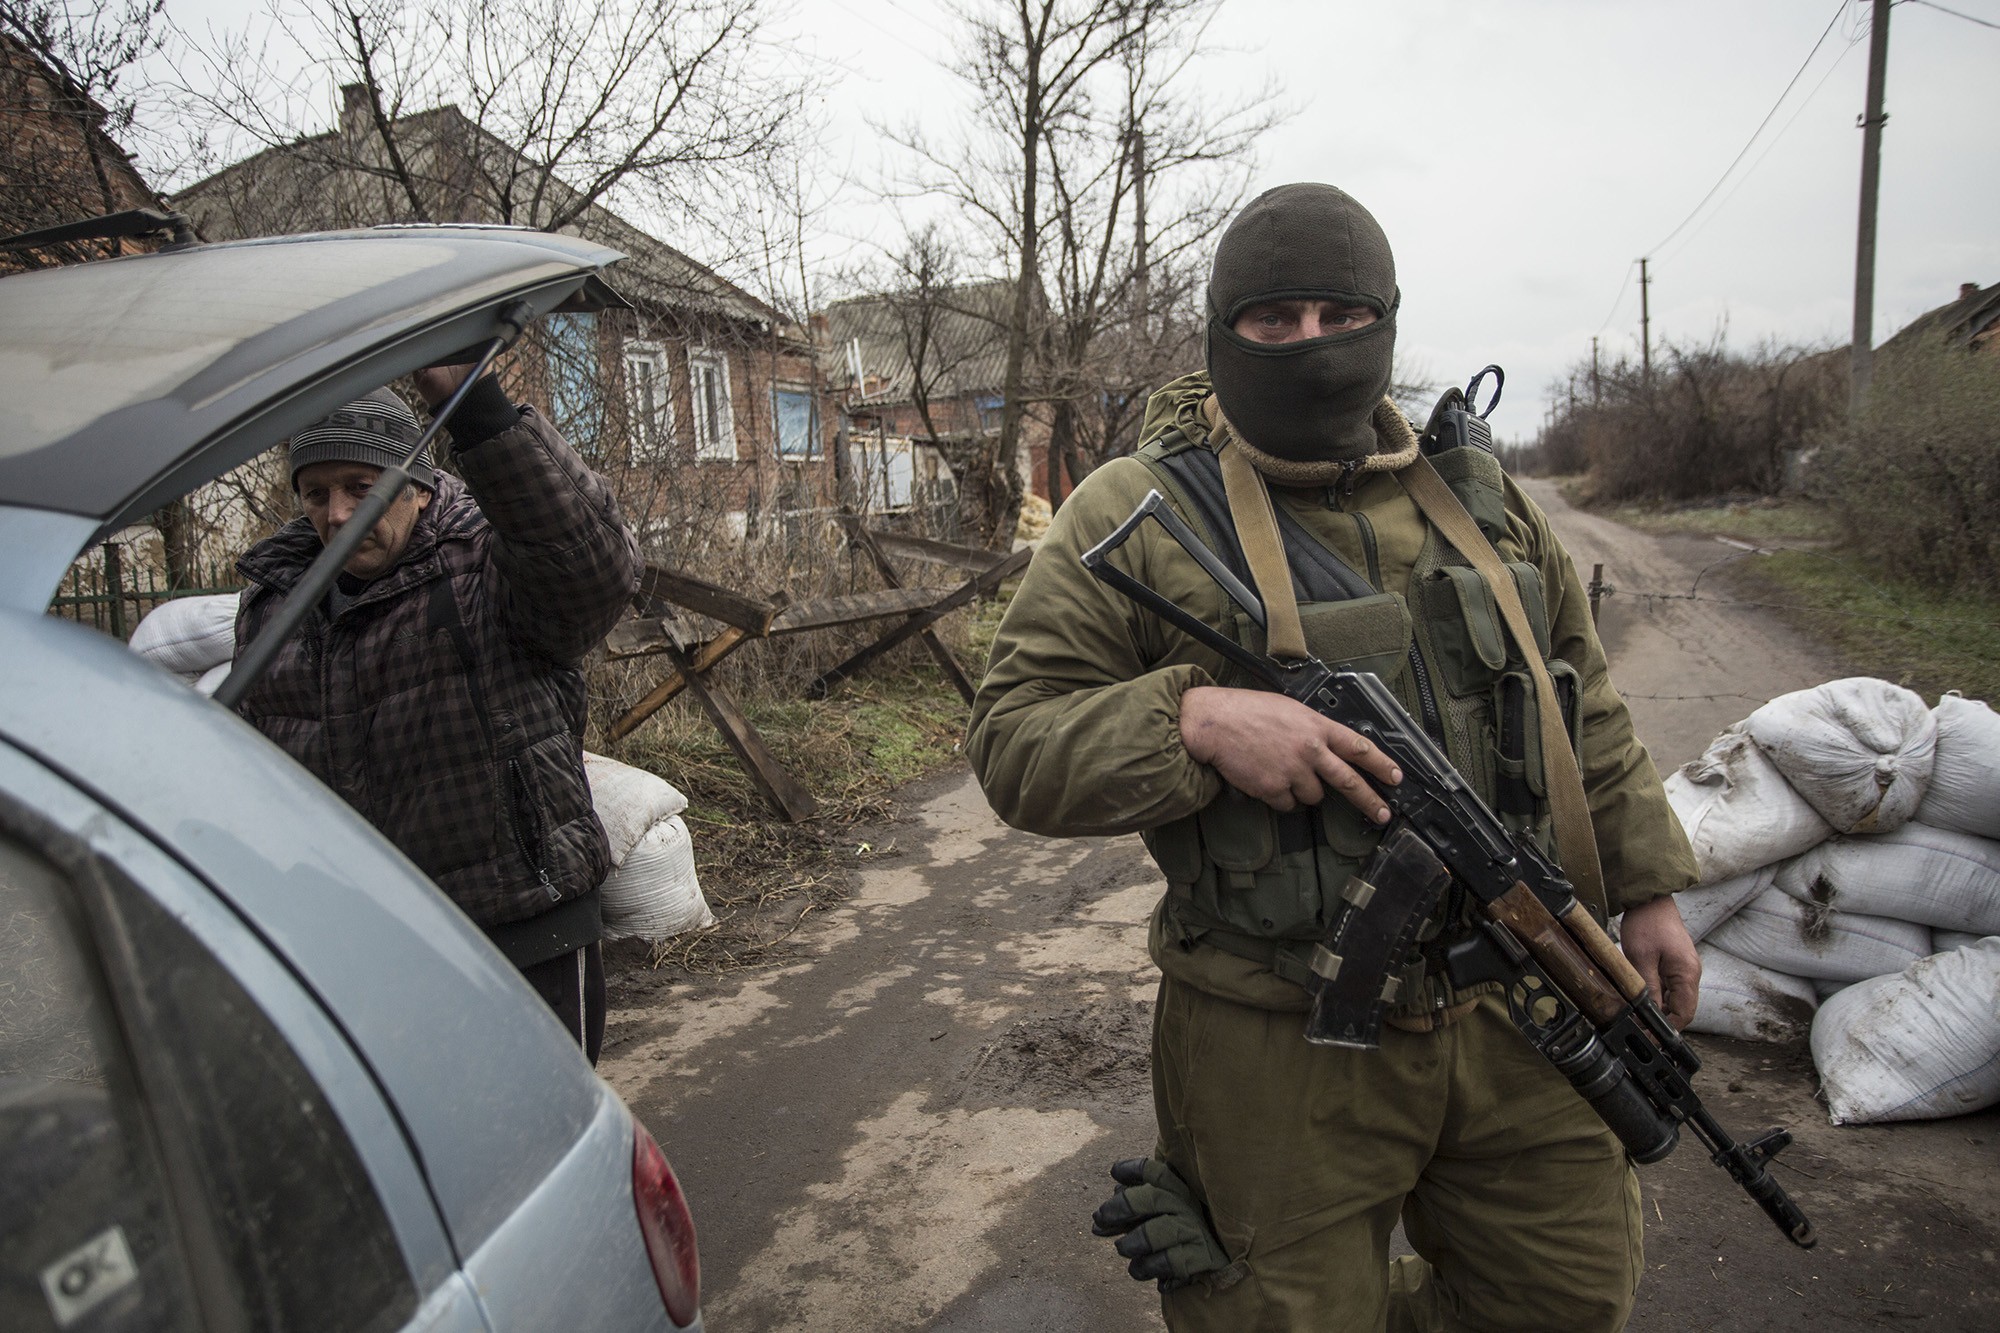 A Ukrainian soldier checks a car in Verkhniotoretske which is heading from the separatist-held zone on Nov. 29.